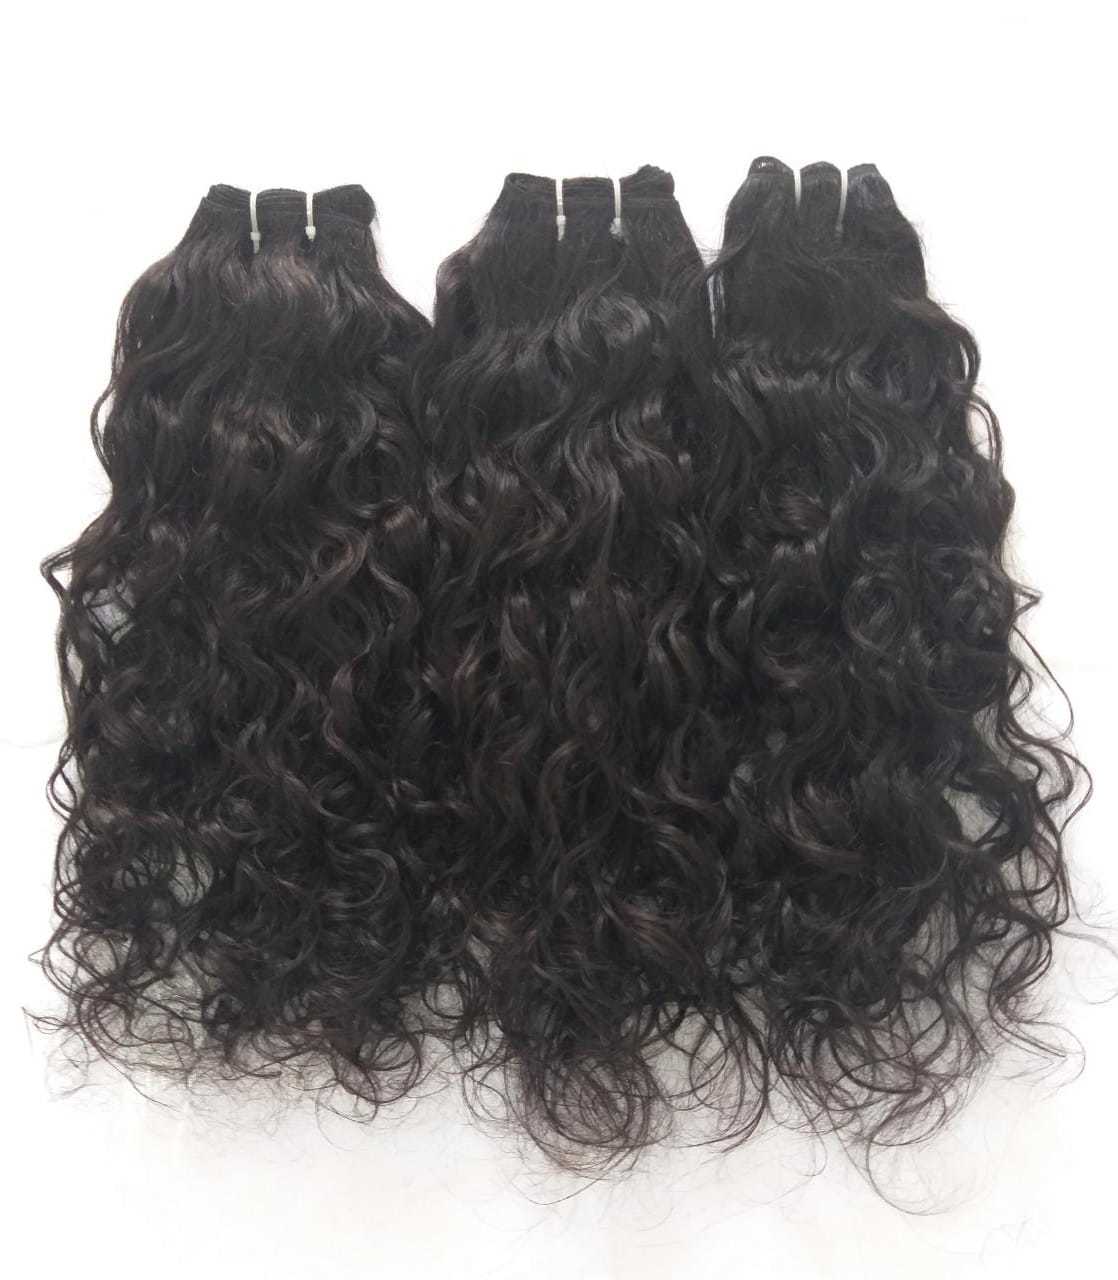 Cuticle Aligned Deep Curly Peruvian Human Hair  Remy Curly Hair